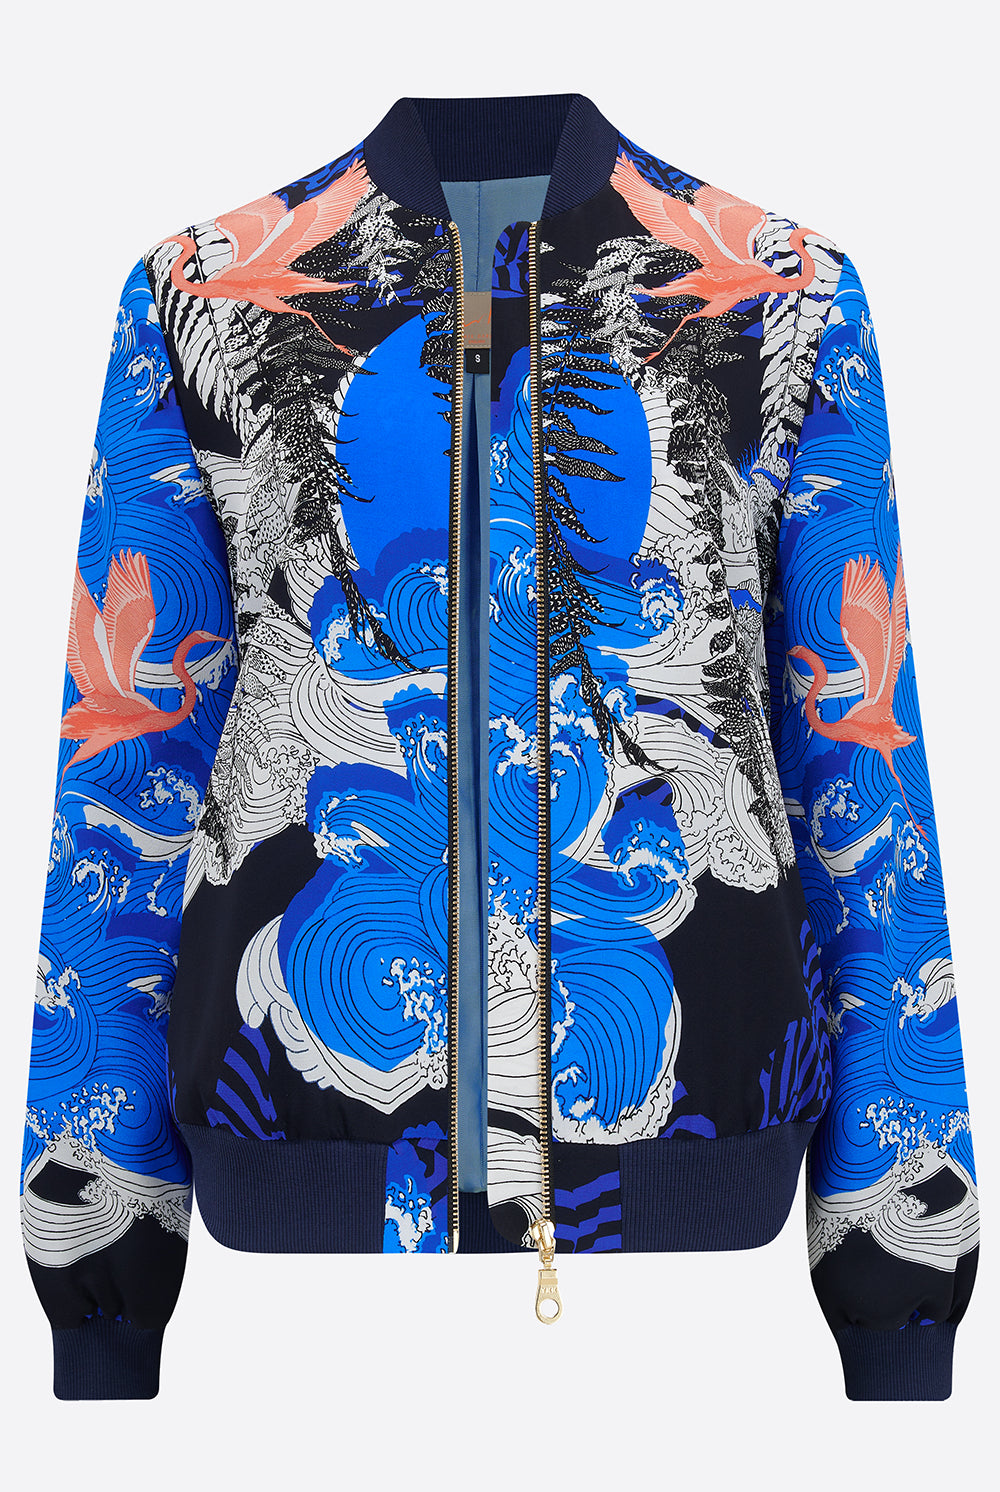 Front of silk bomber jacket un zipped in blue, white and coral with waves and birds design